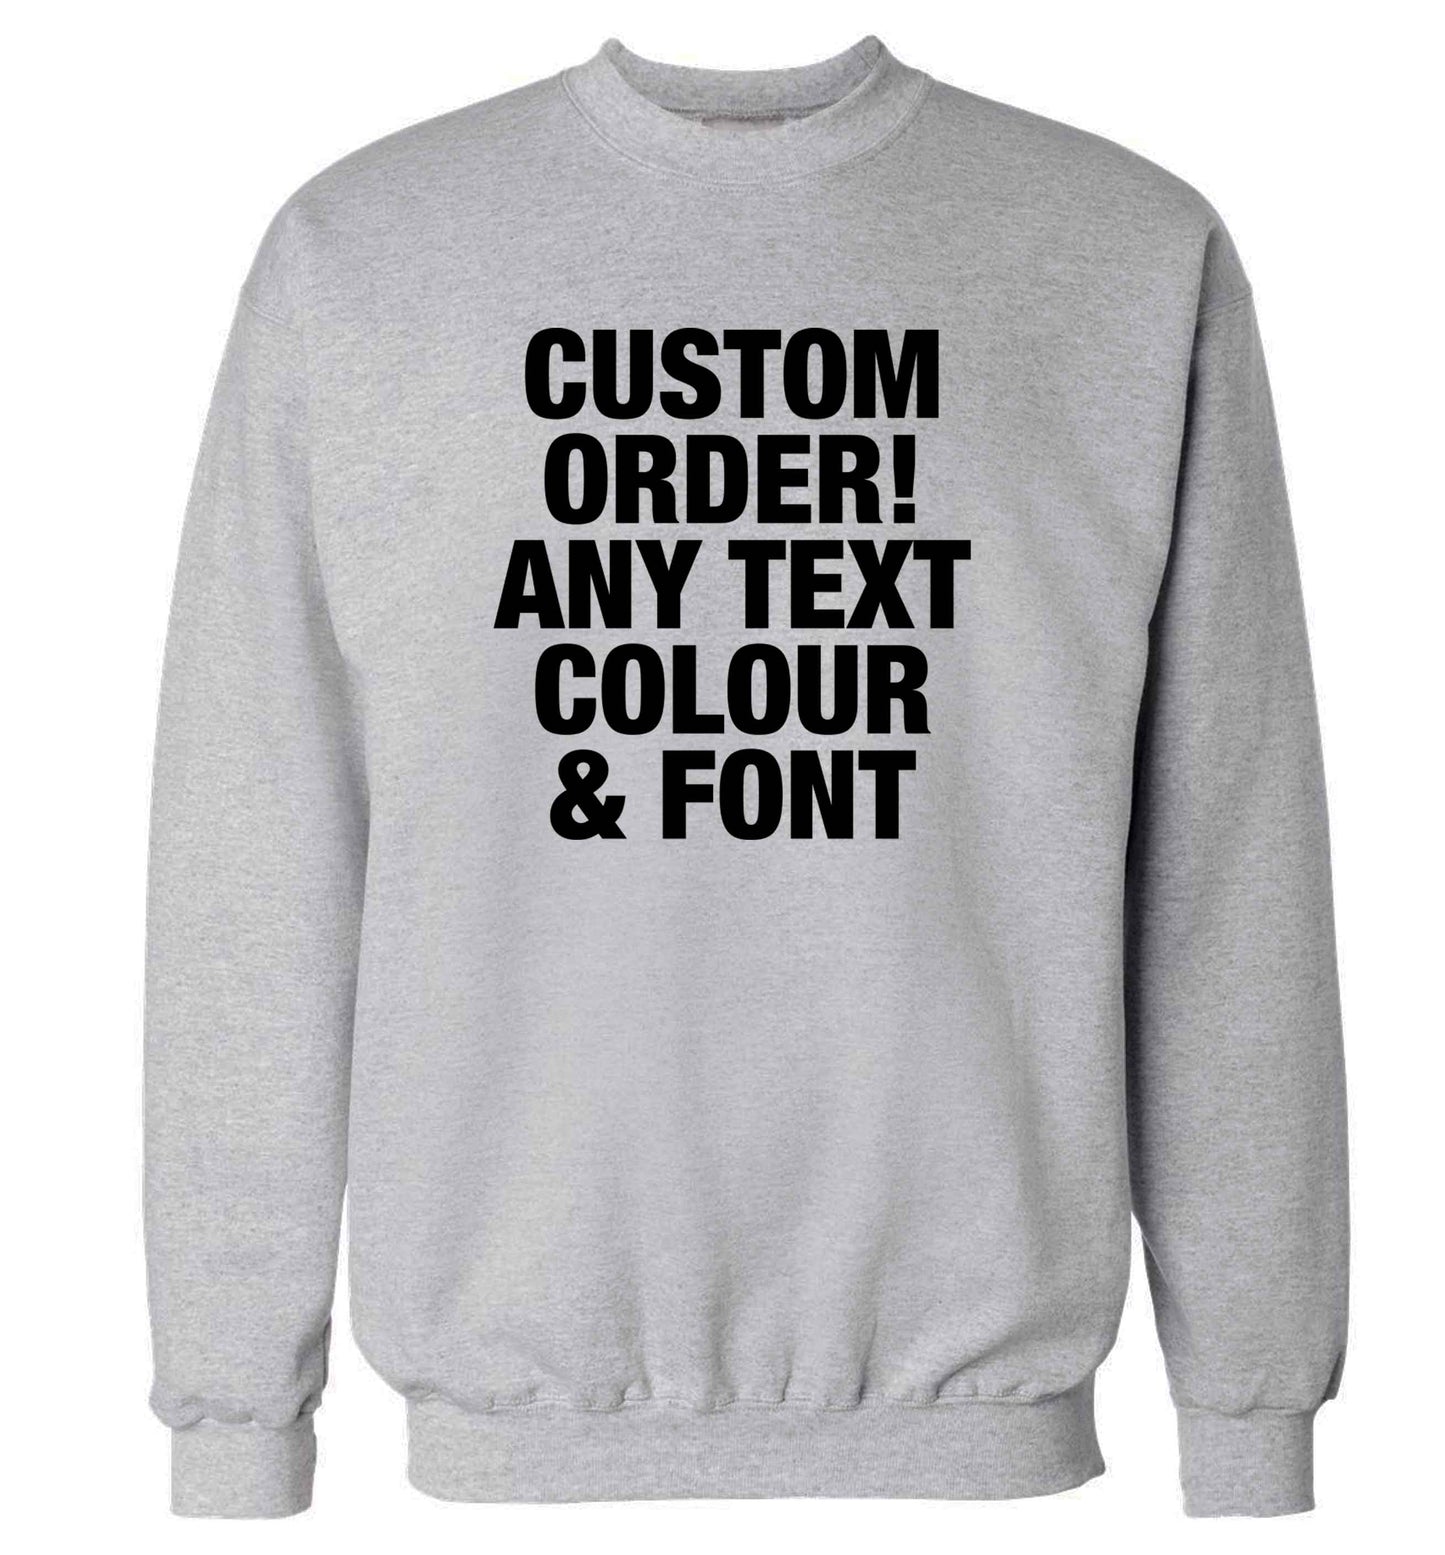 Custom order any text colour and font adult's unisex grey sweater 2XL